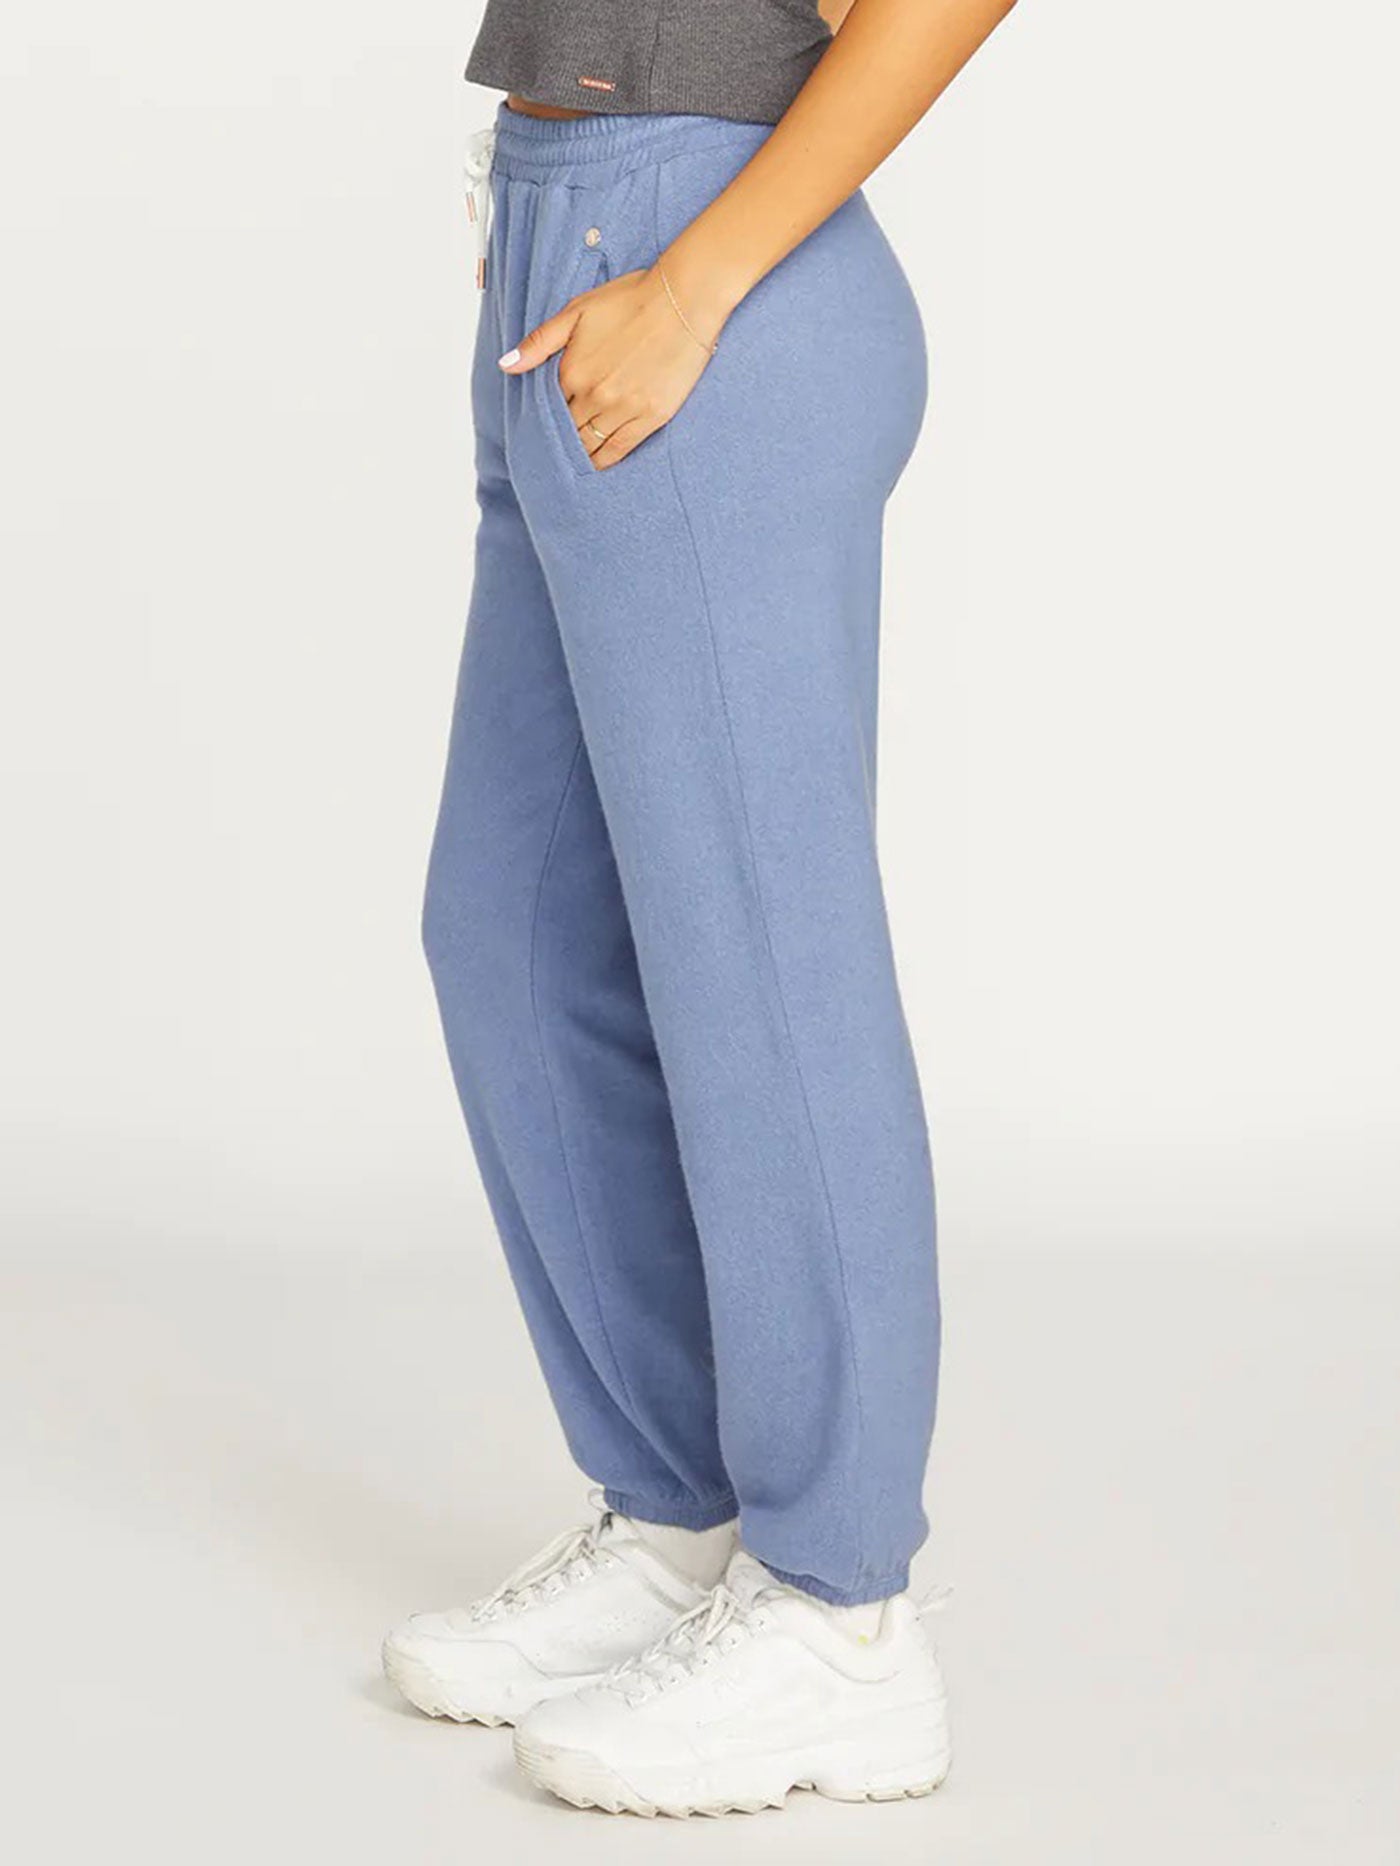 Volcom Spring 2023 Lived In Lounge Sweatpants